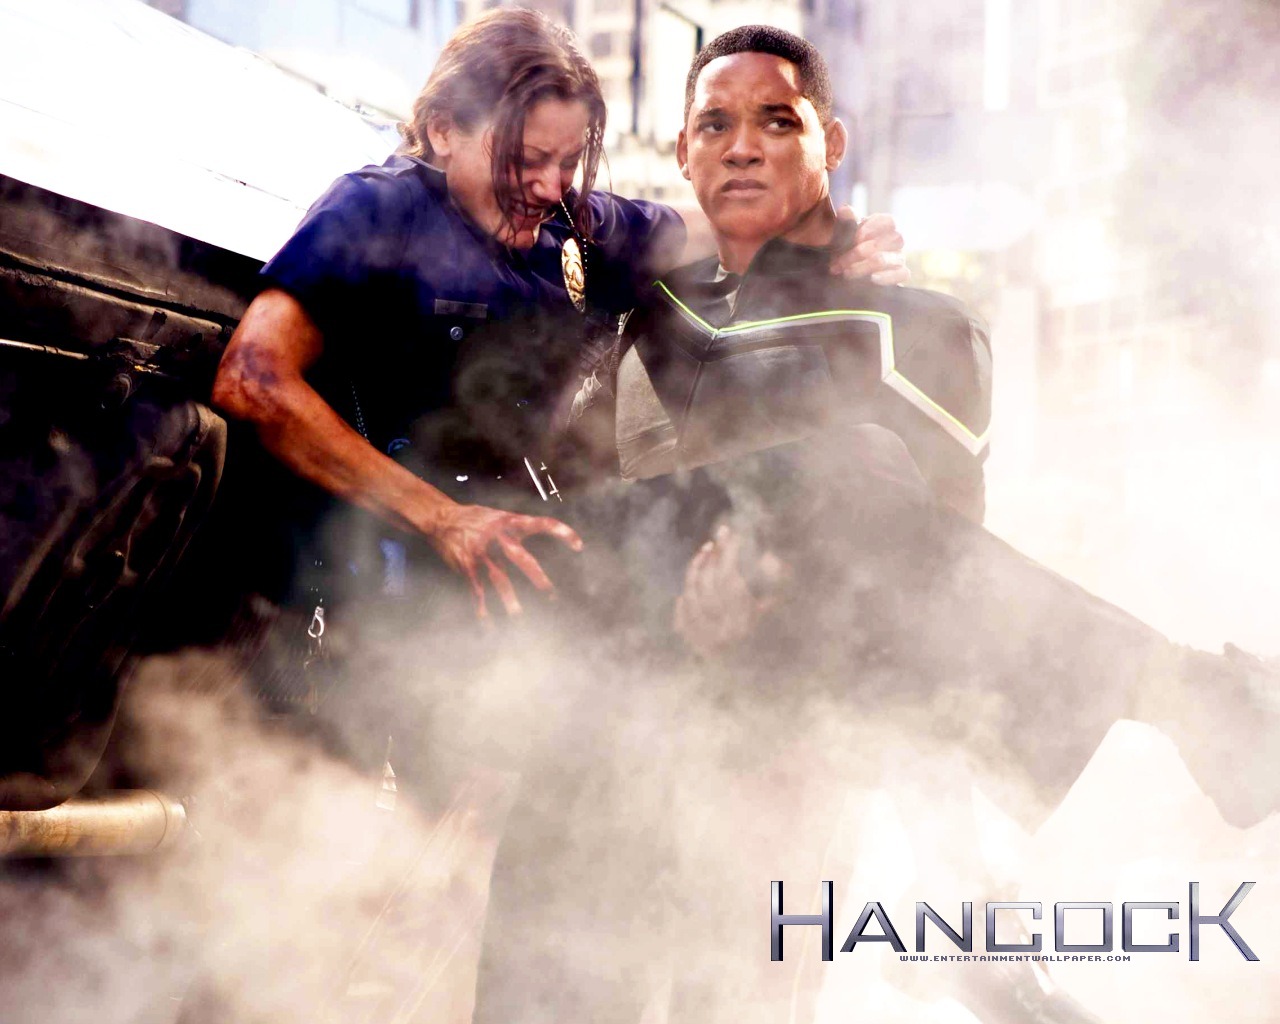 Hancock Image HD Wallpaper And Background Photos